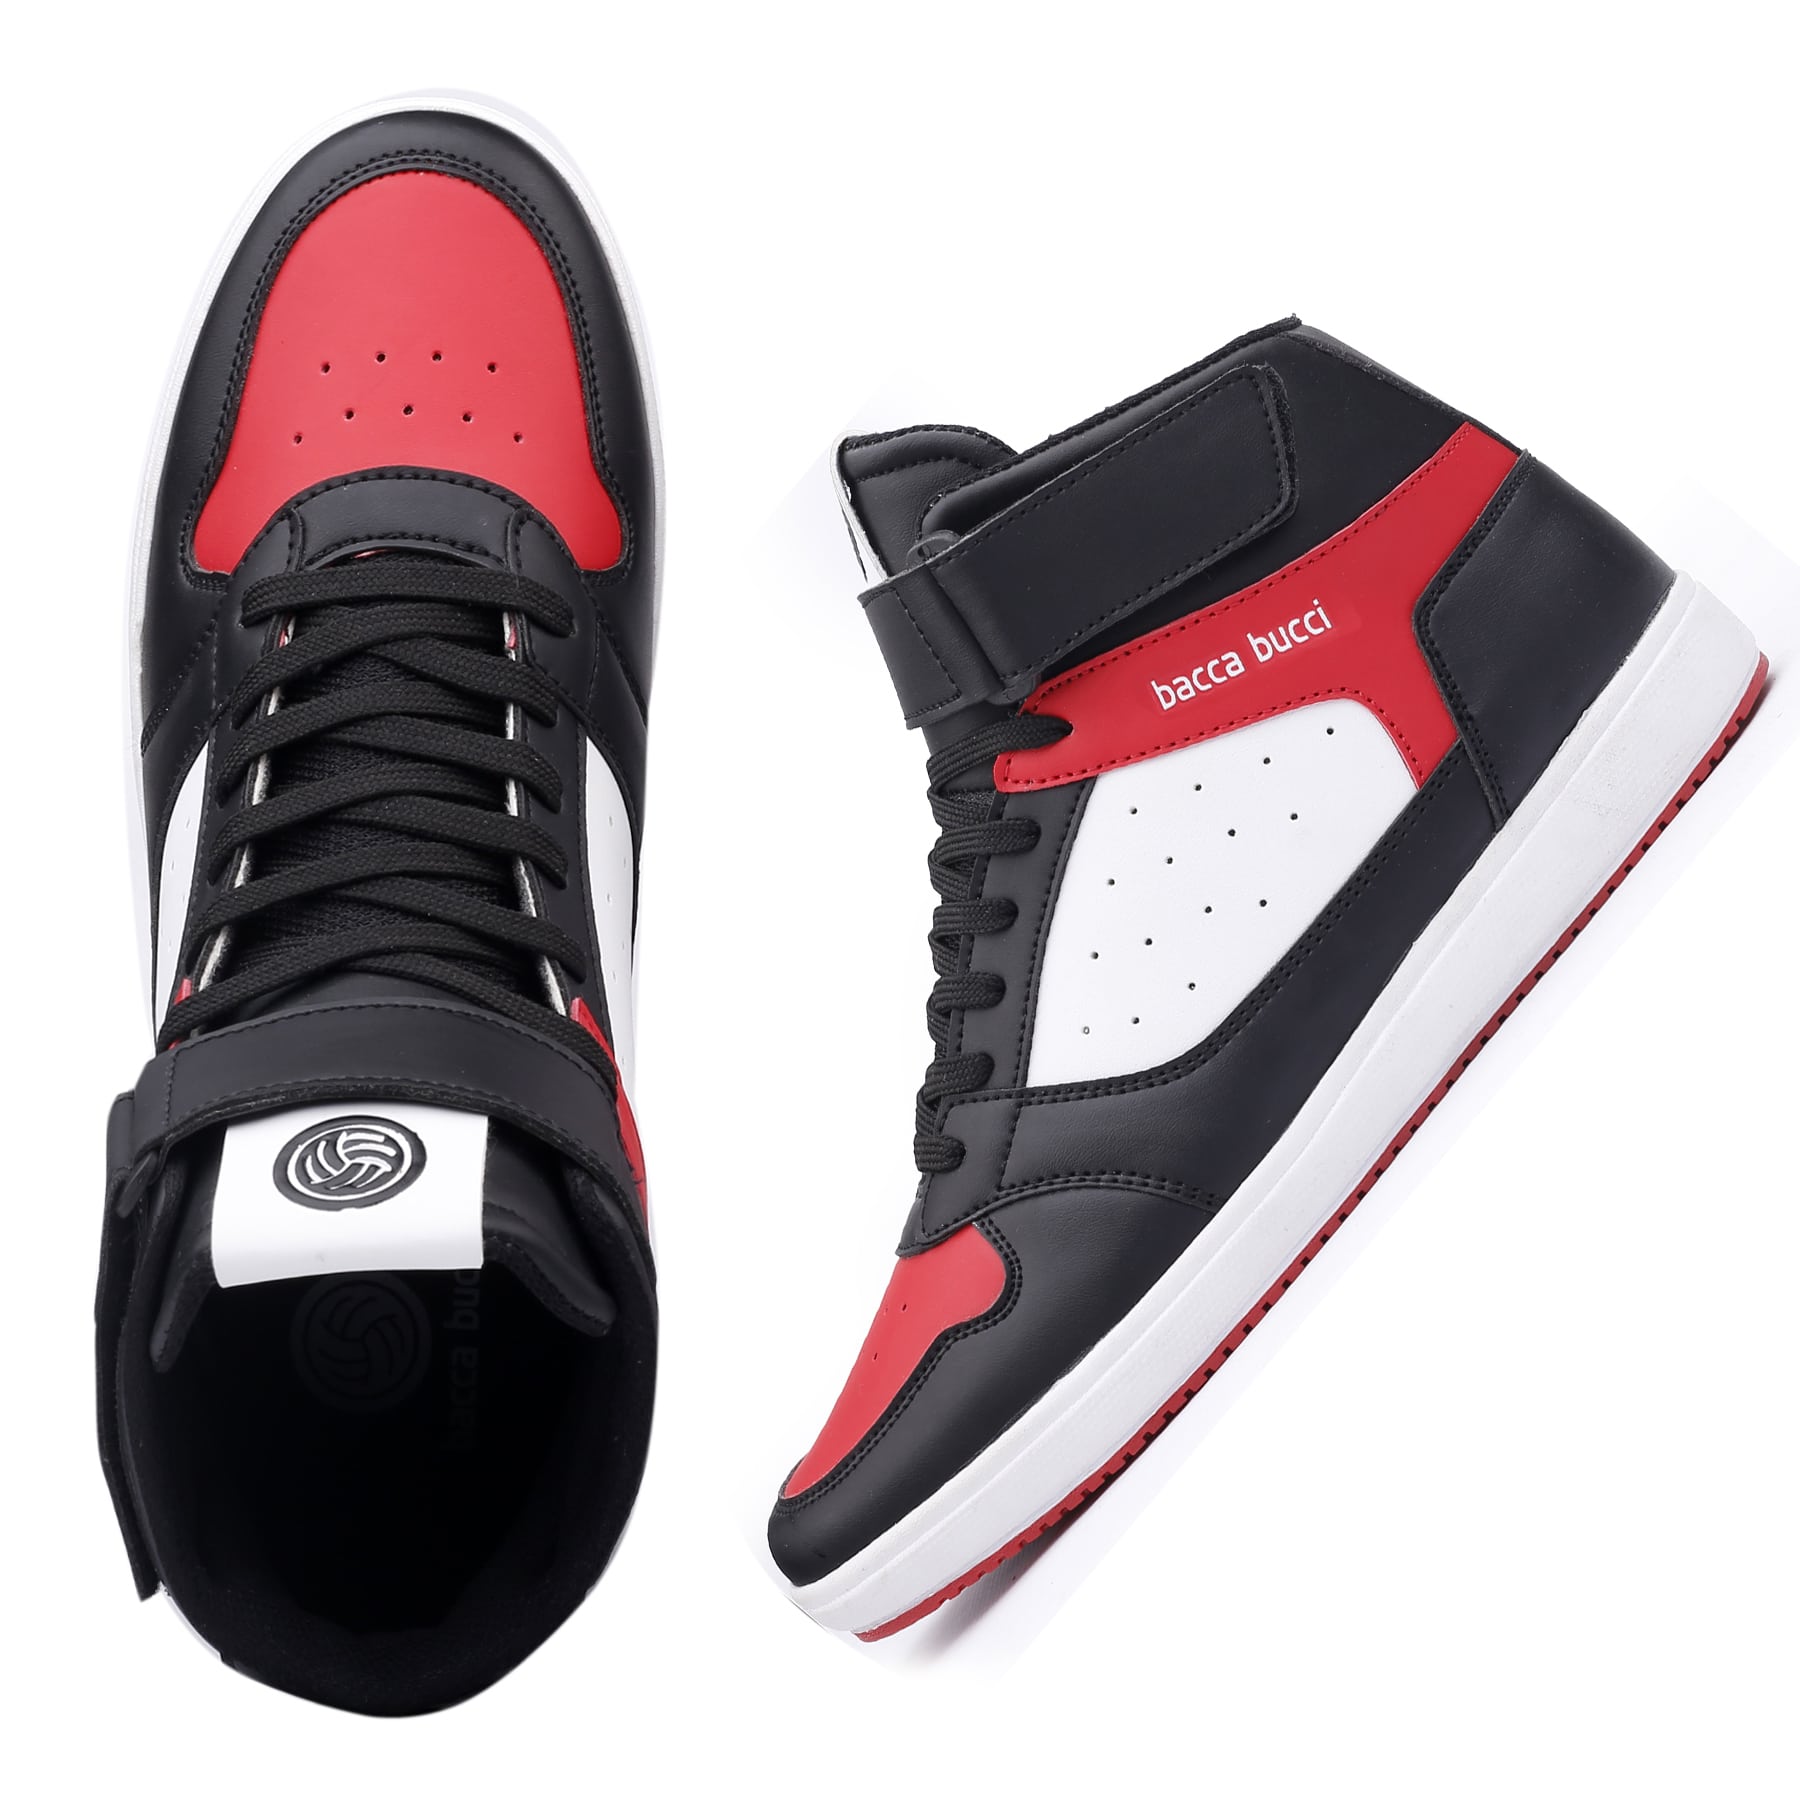 RED BLACK SHOES SNEAKERS ANKLE LENGTH